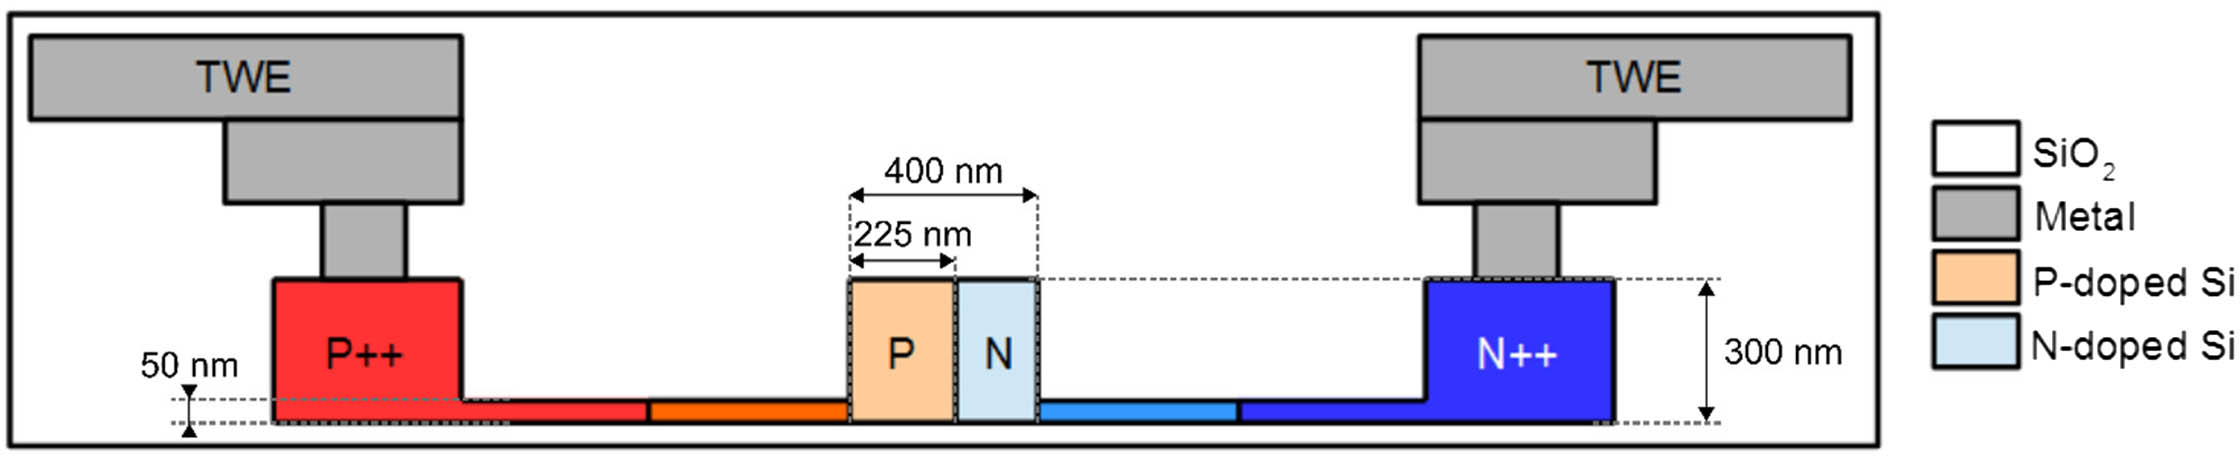 Schematic cross section of the phase modulator. A PN junction is created in the waveguide to leverage the free-carrier plasma dispersion effect in the depletion regime. Higher doping concentration is used near the metallic contacts in order to reduce the access resistance. The electrical signal travels through metallic travelling wave electrodes (TWEs).